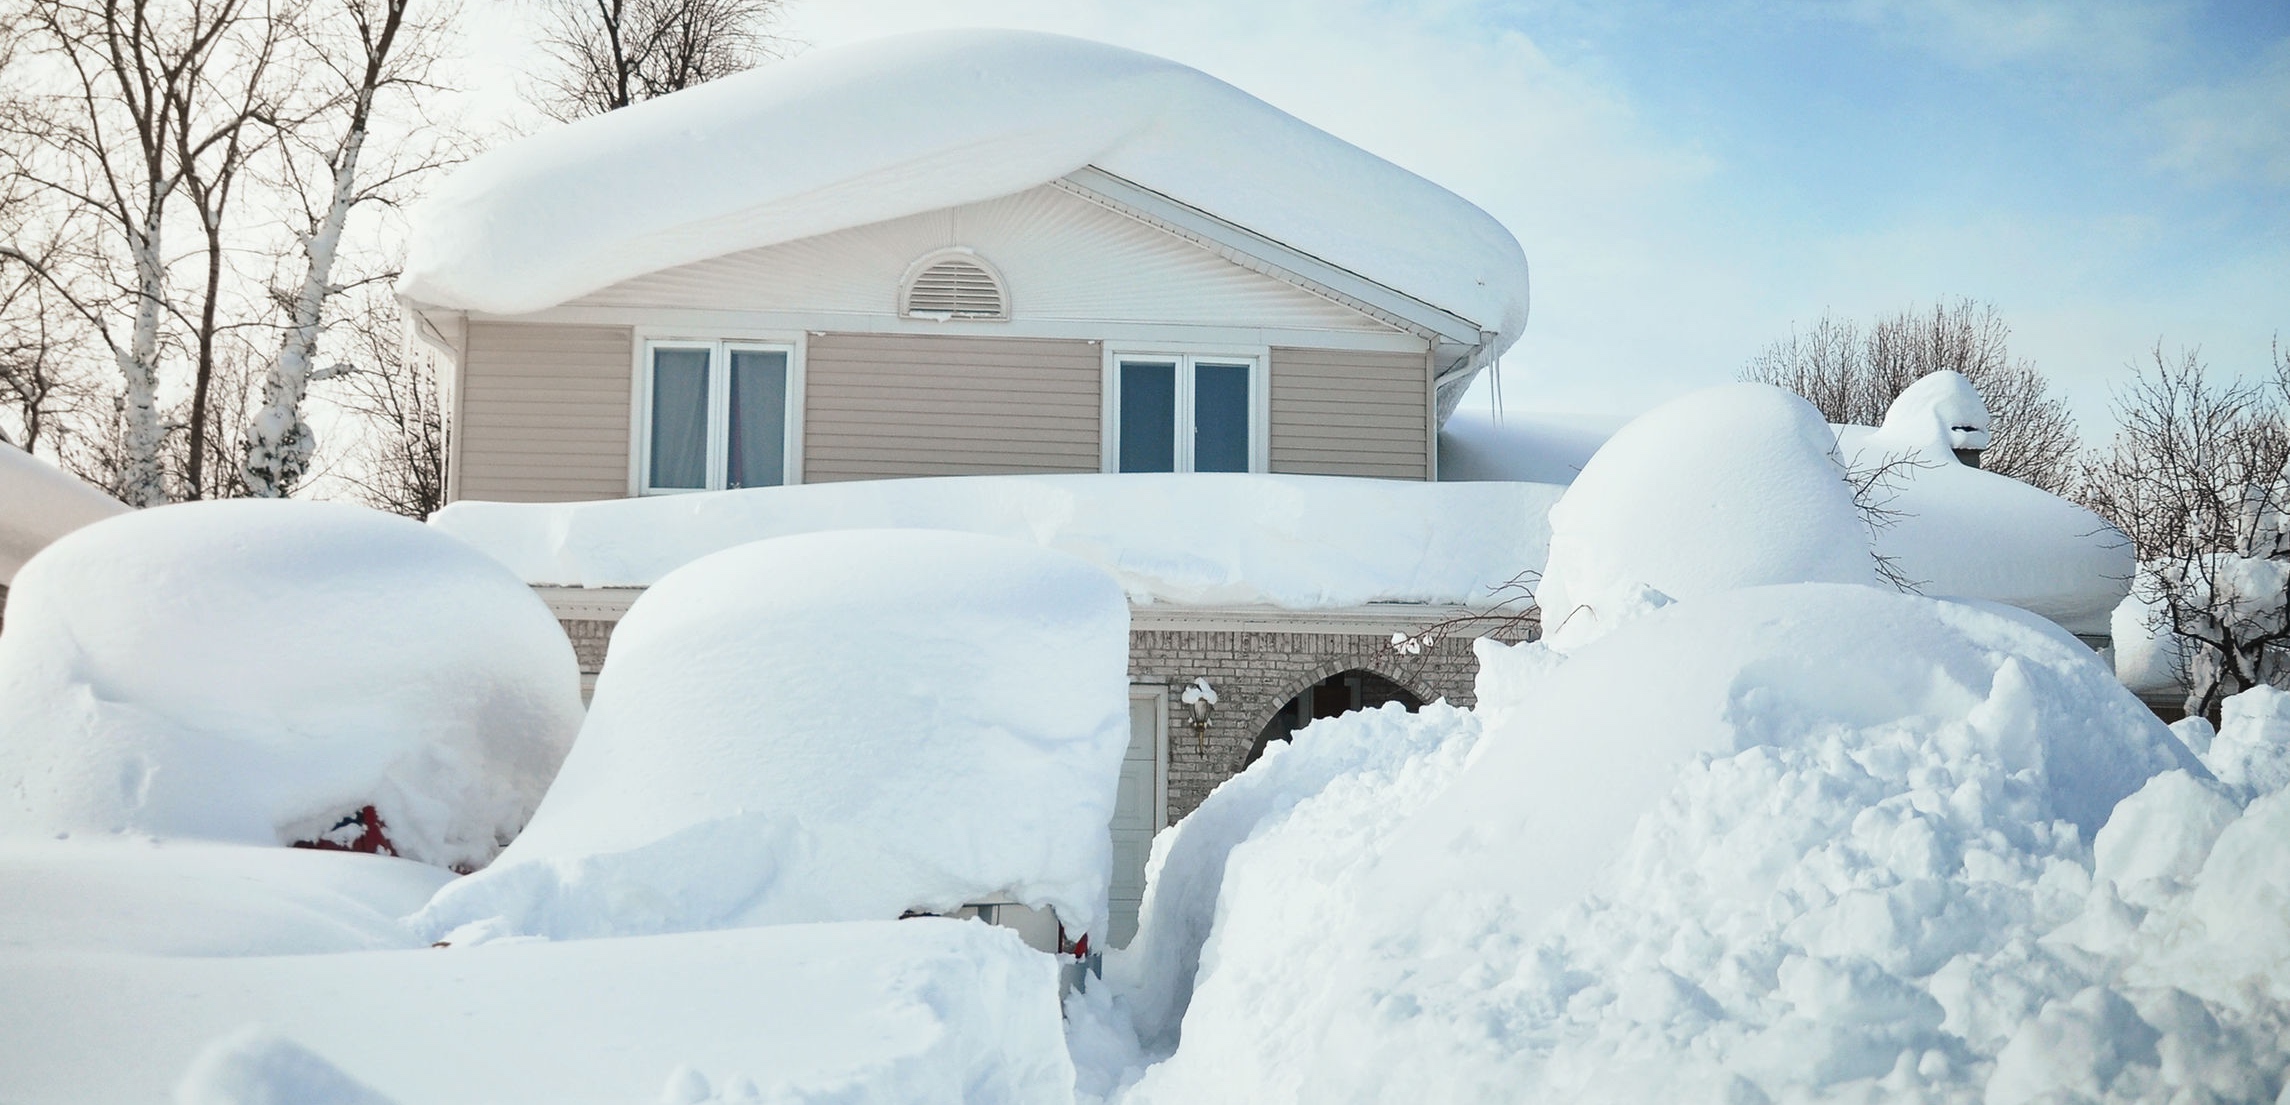 House covered in thick snow